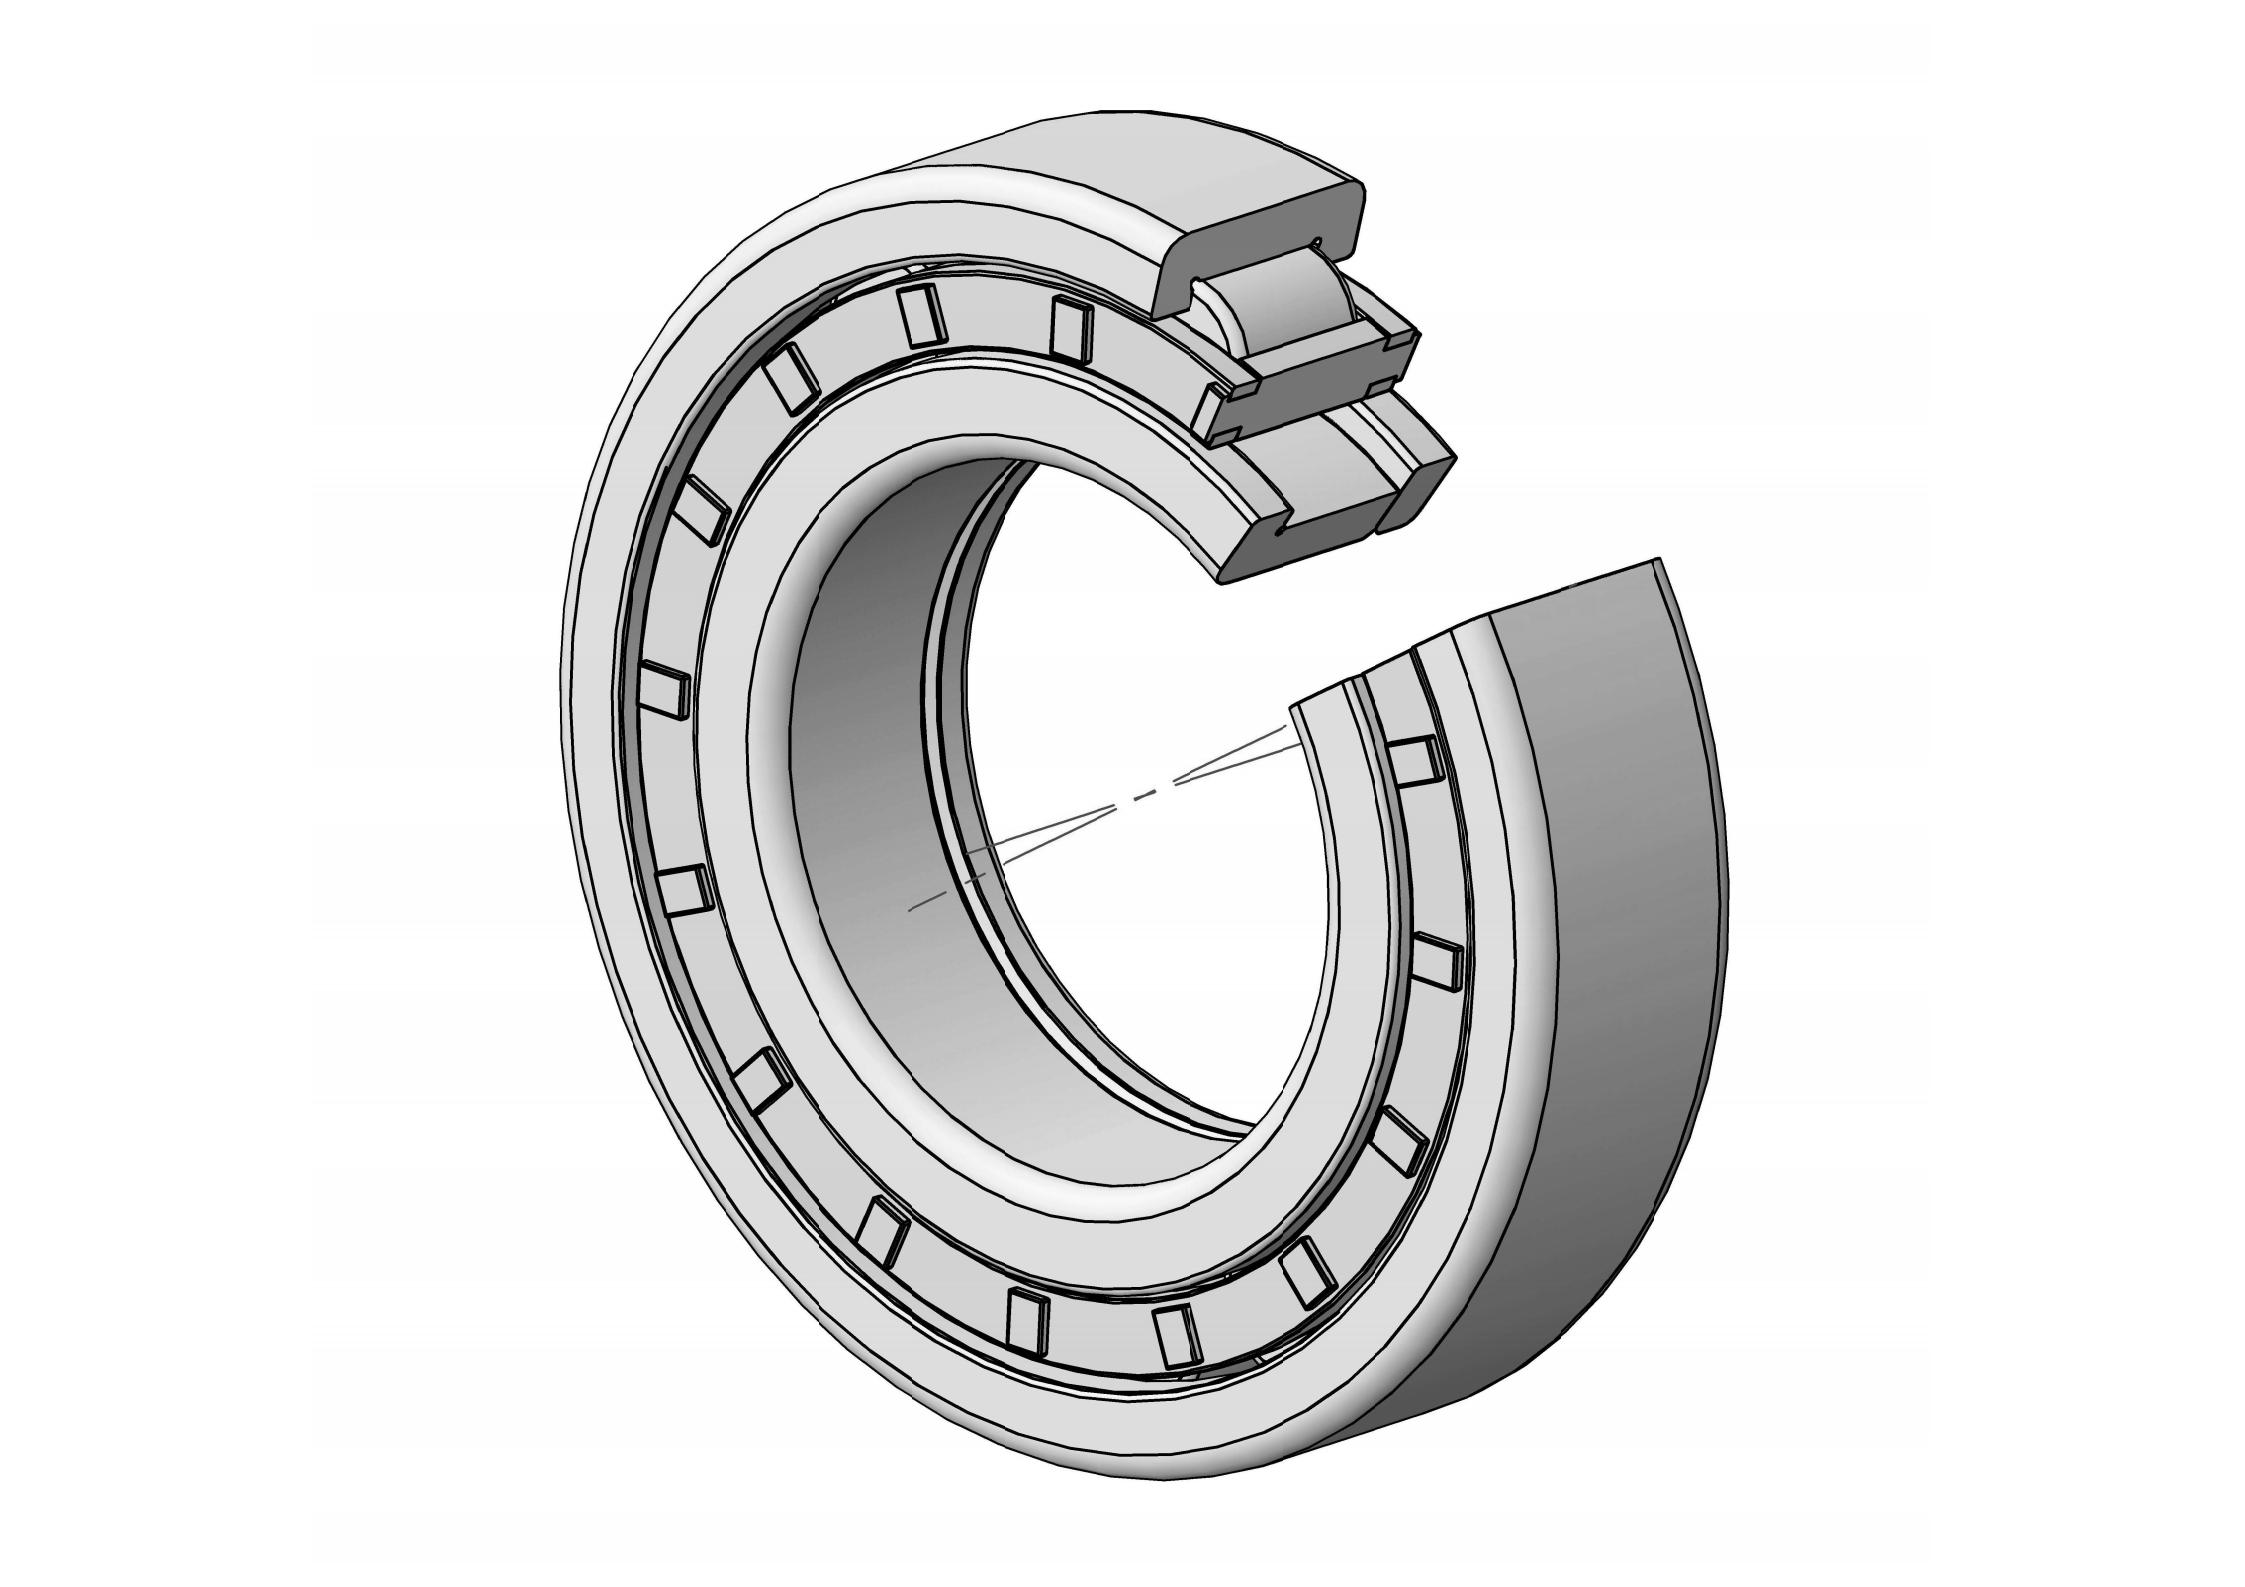 NUP320-EM Single Row Cylindrical roller bearing 